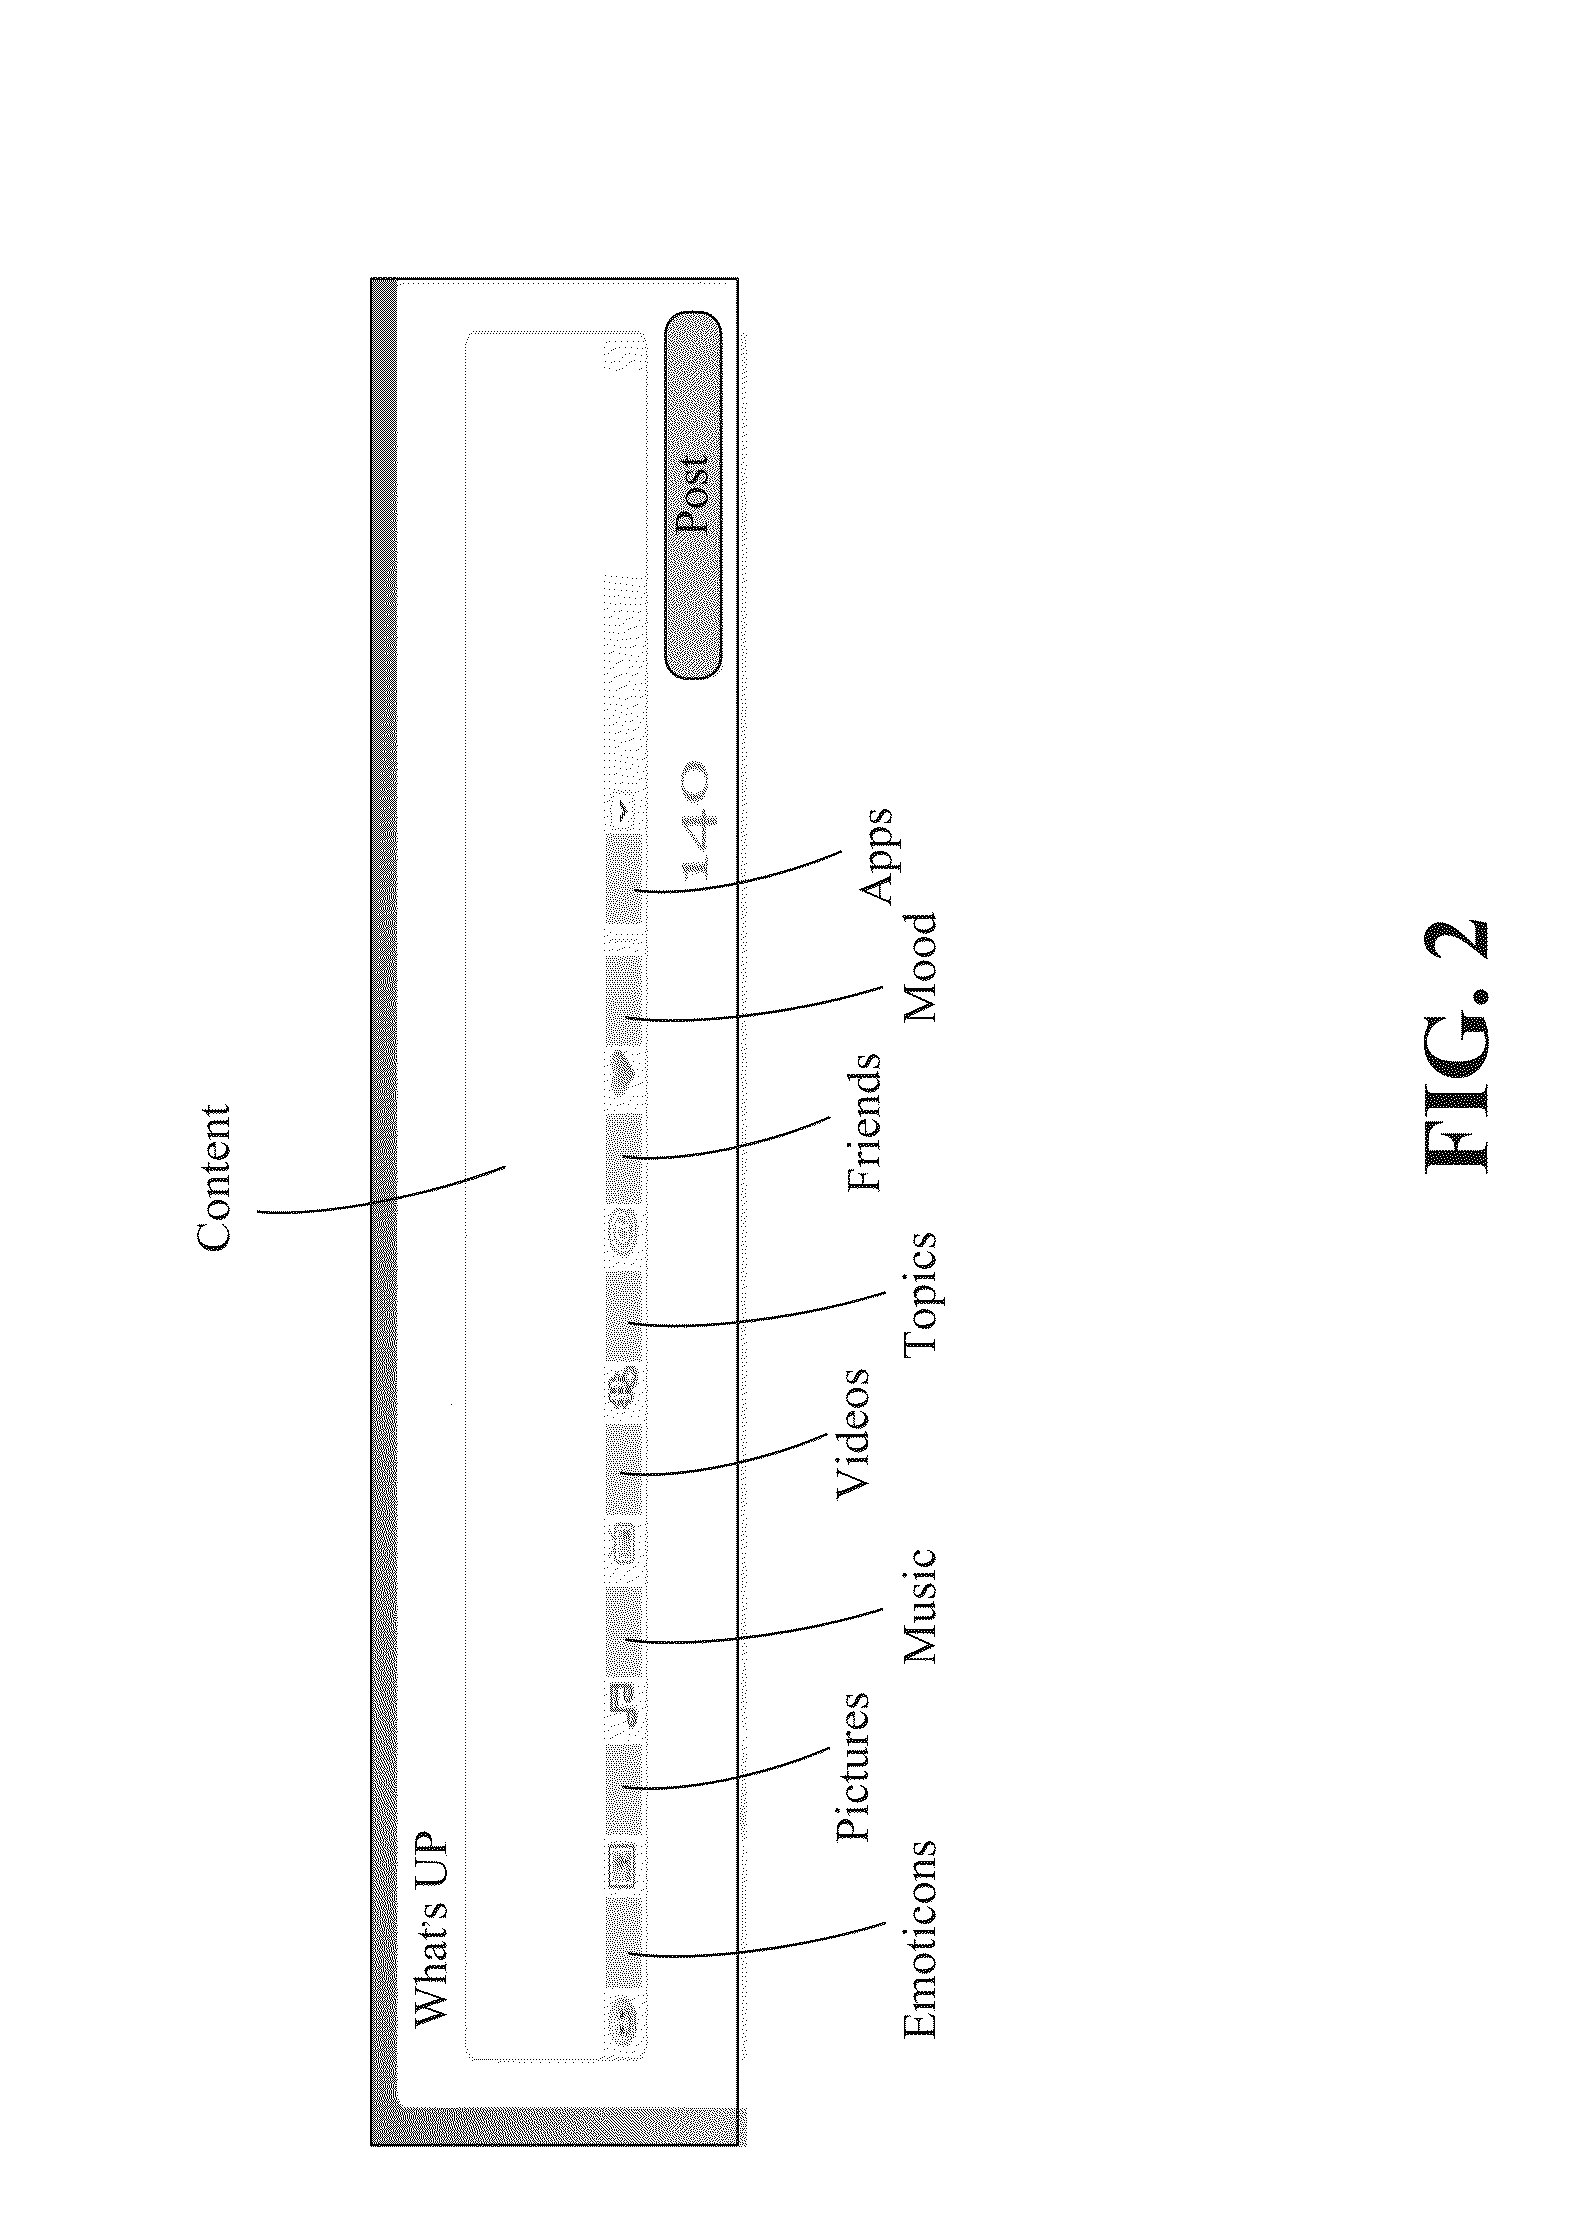 Browser, and voice control method and system for browser operation